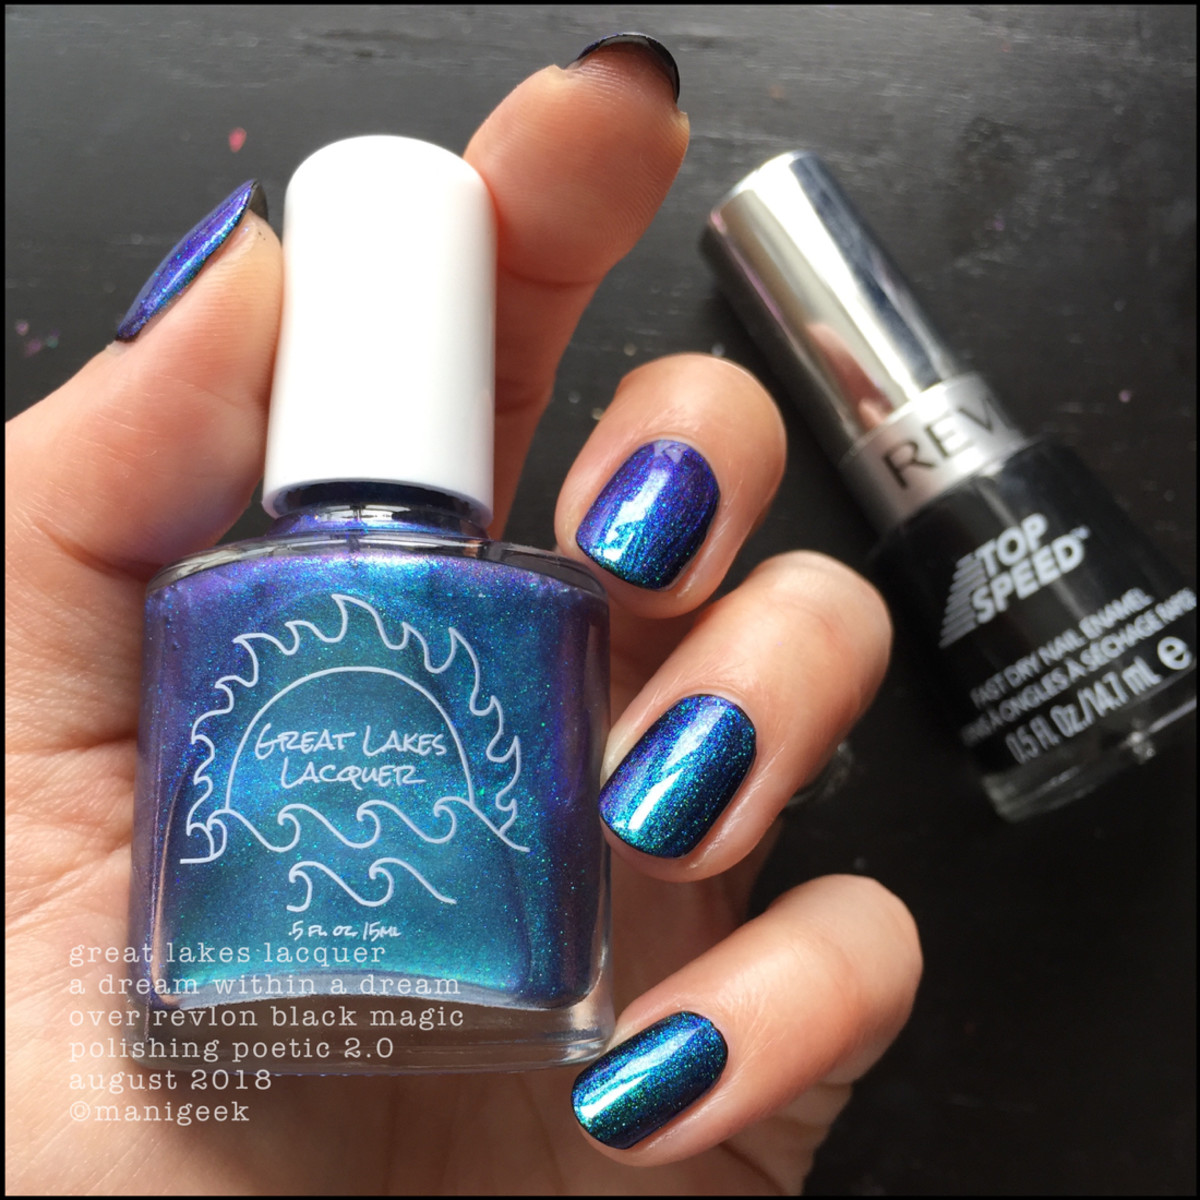 Great Lakes Lacquer A Dream Within A Dream over black 1 _ Great Lakes Lacquer Polishing Poetic 2.0 Swatches Review